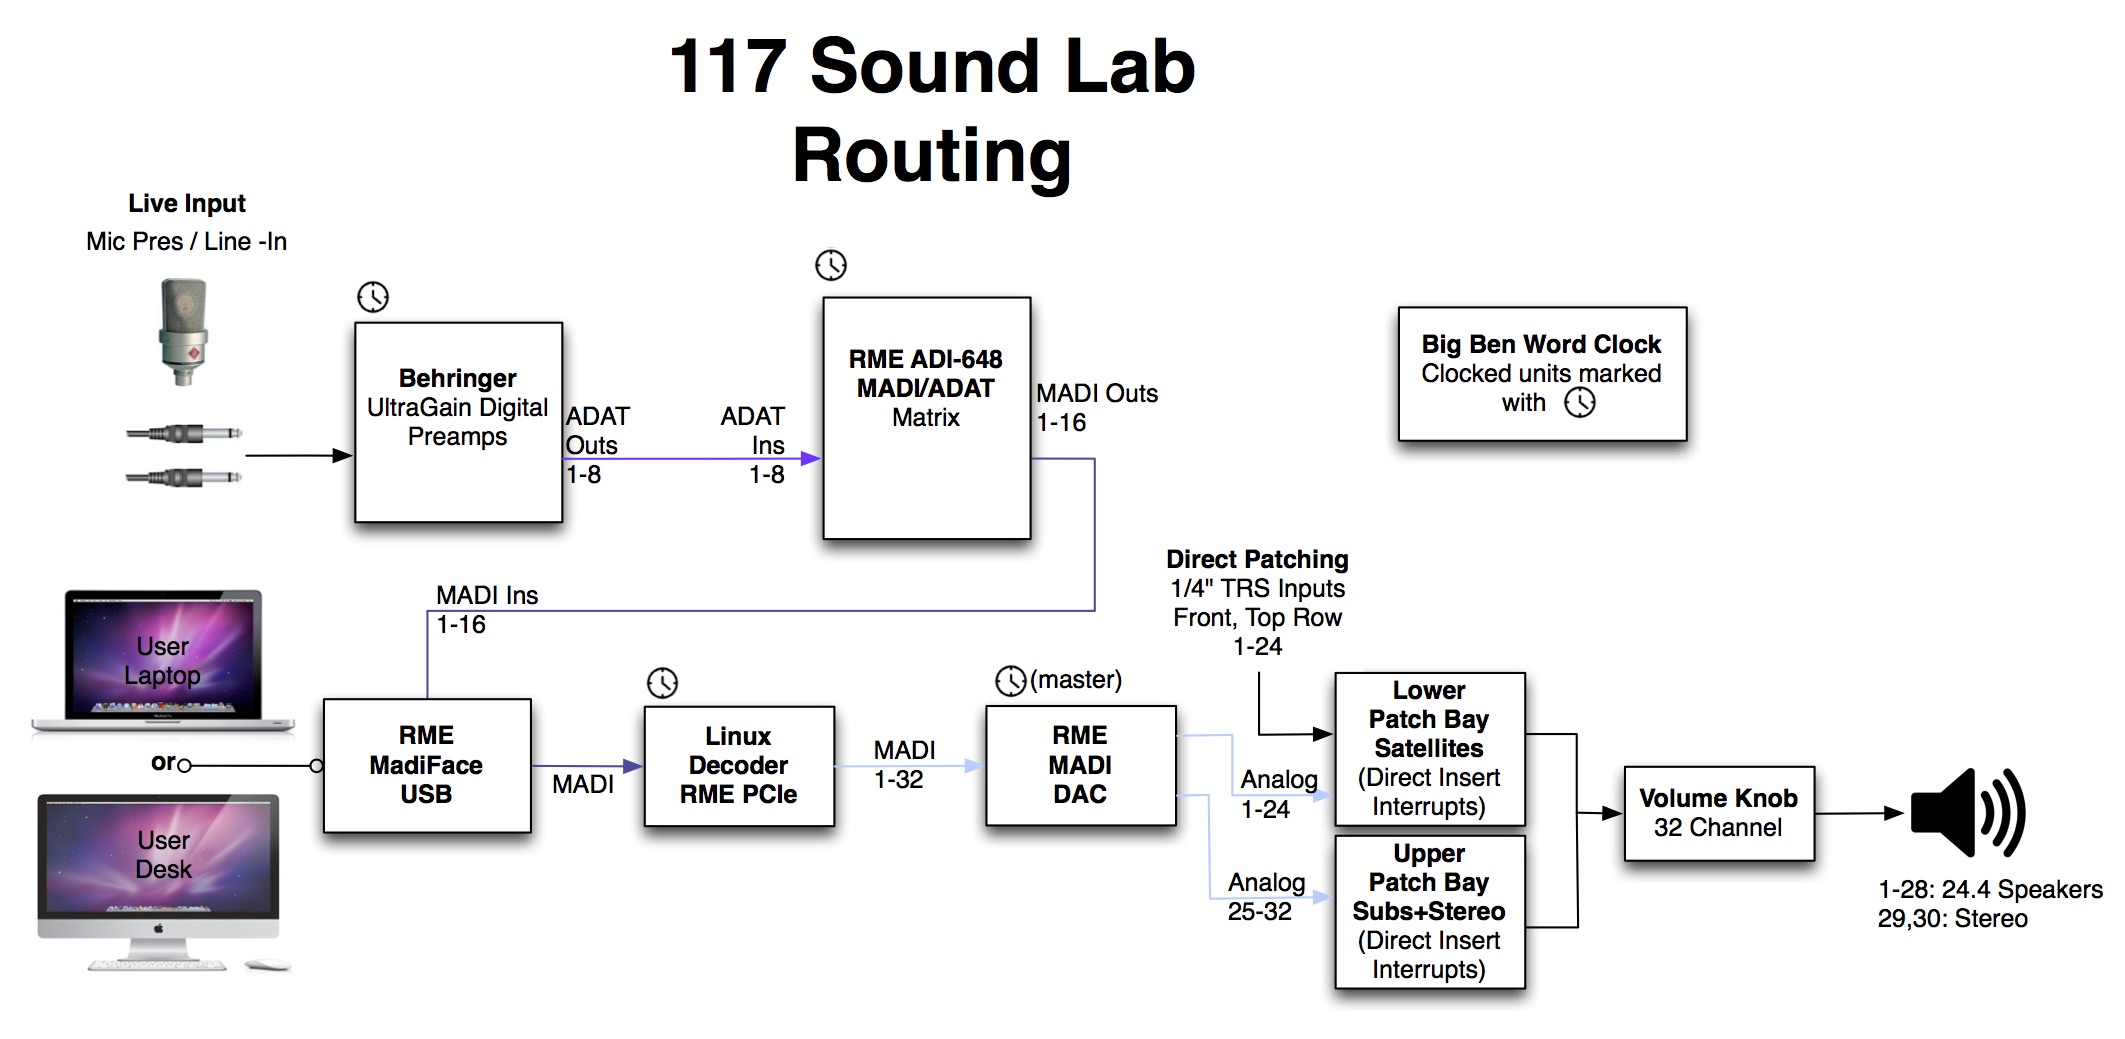 Room 117 Routing Diagram